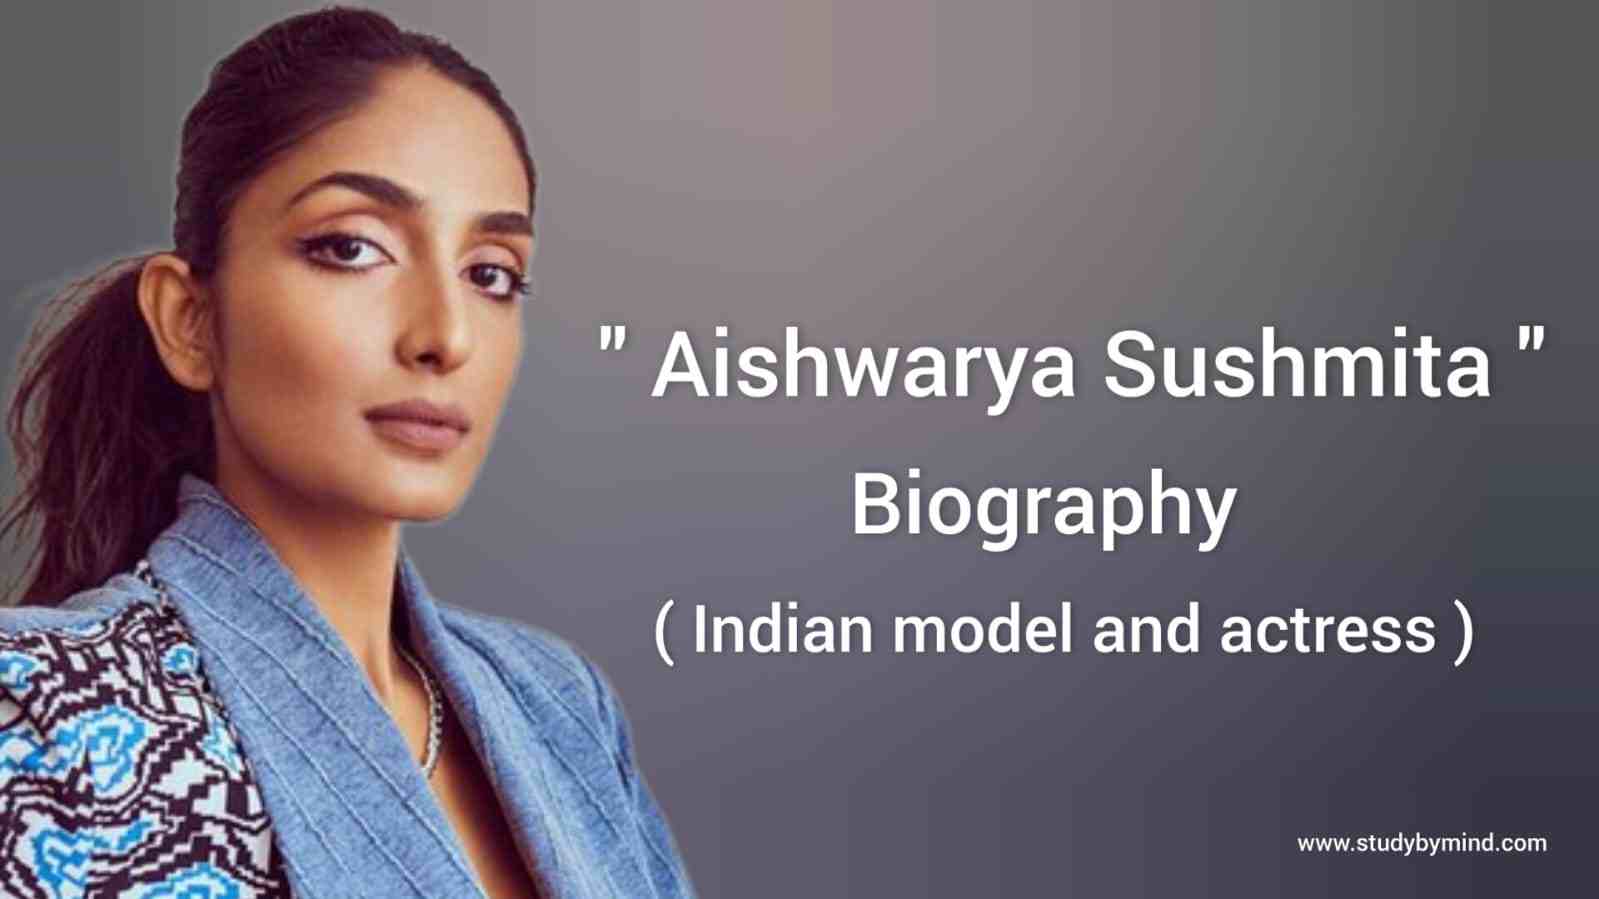 You are currently viewing Aishwarya Sushmita biography in english (Indian model and actress)